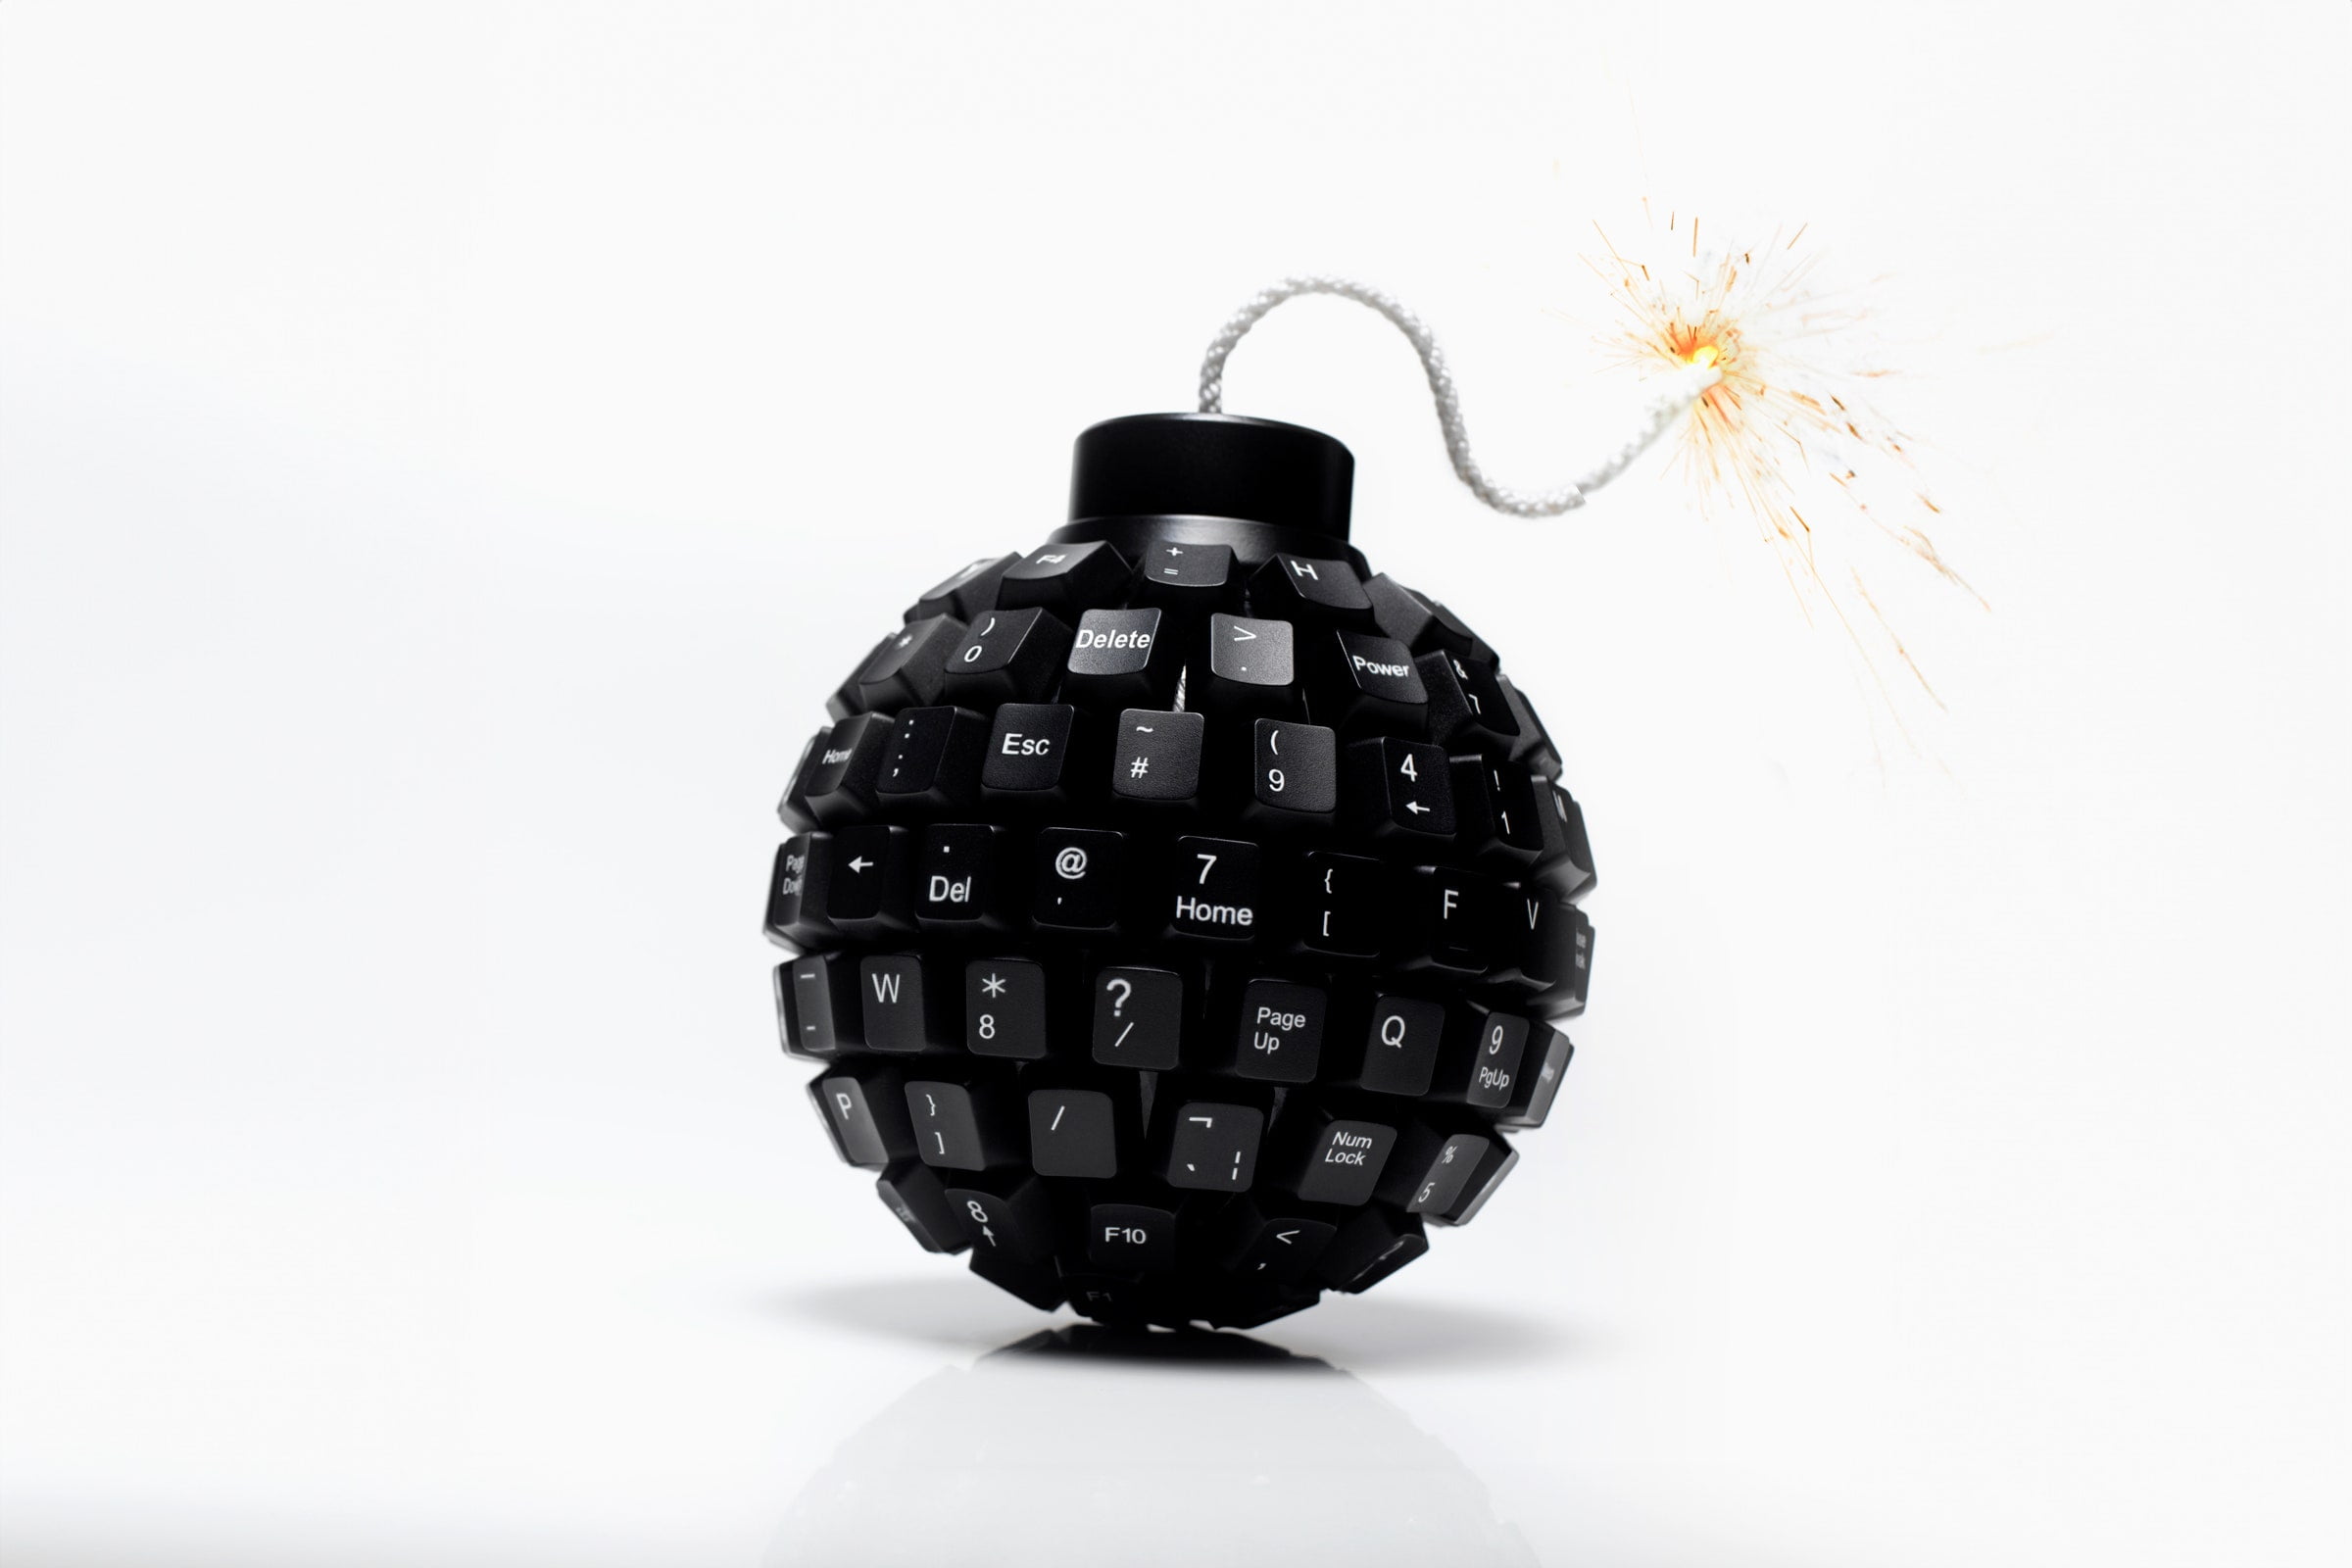 Bomb made out of keyboard keys